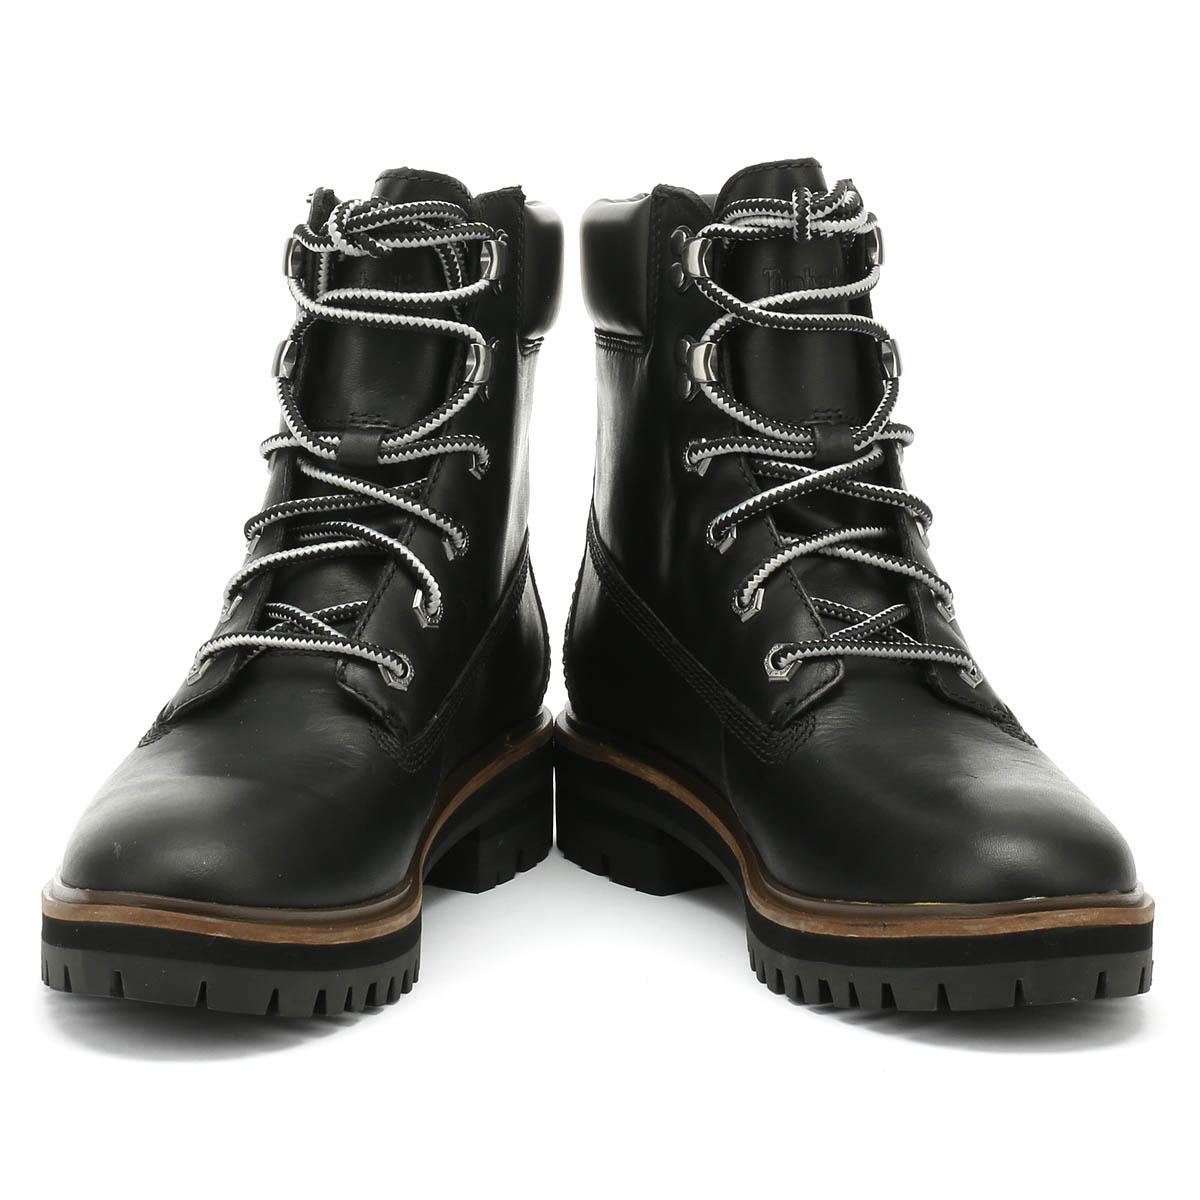 london square 6 inch boot for women in black